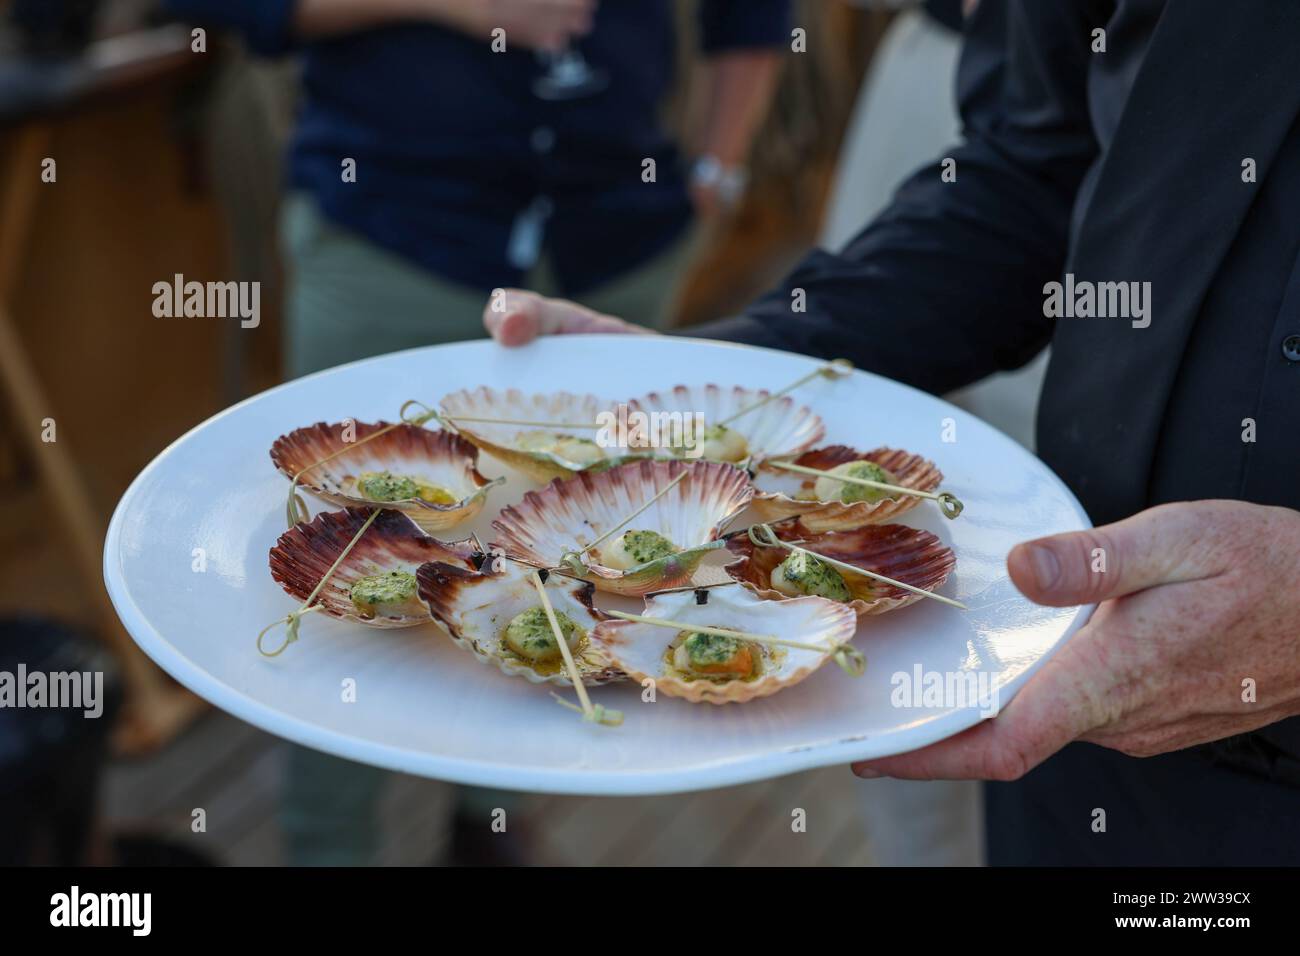 Catering at an event featuring a seafood platter. Stock Photo